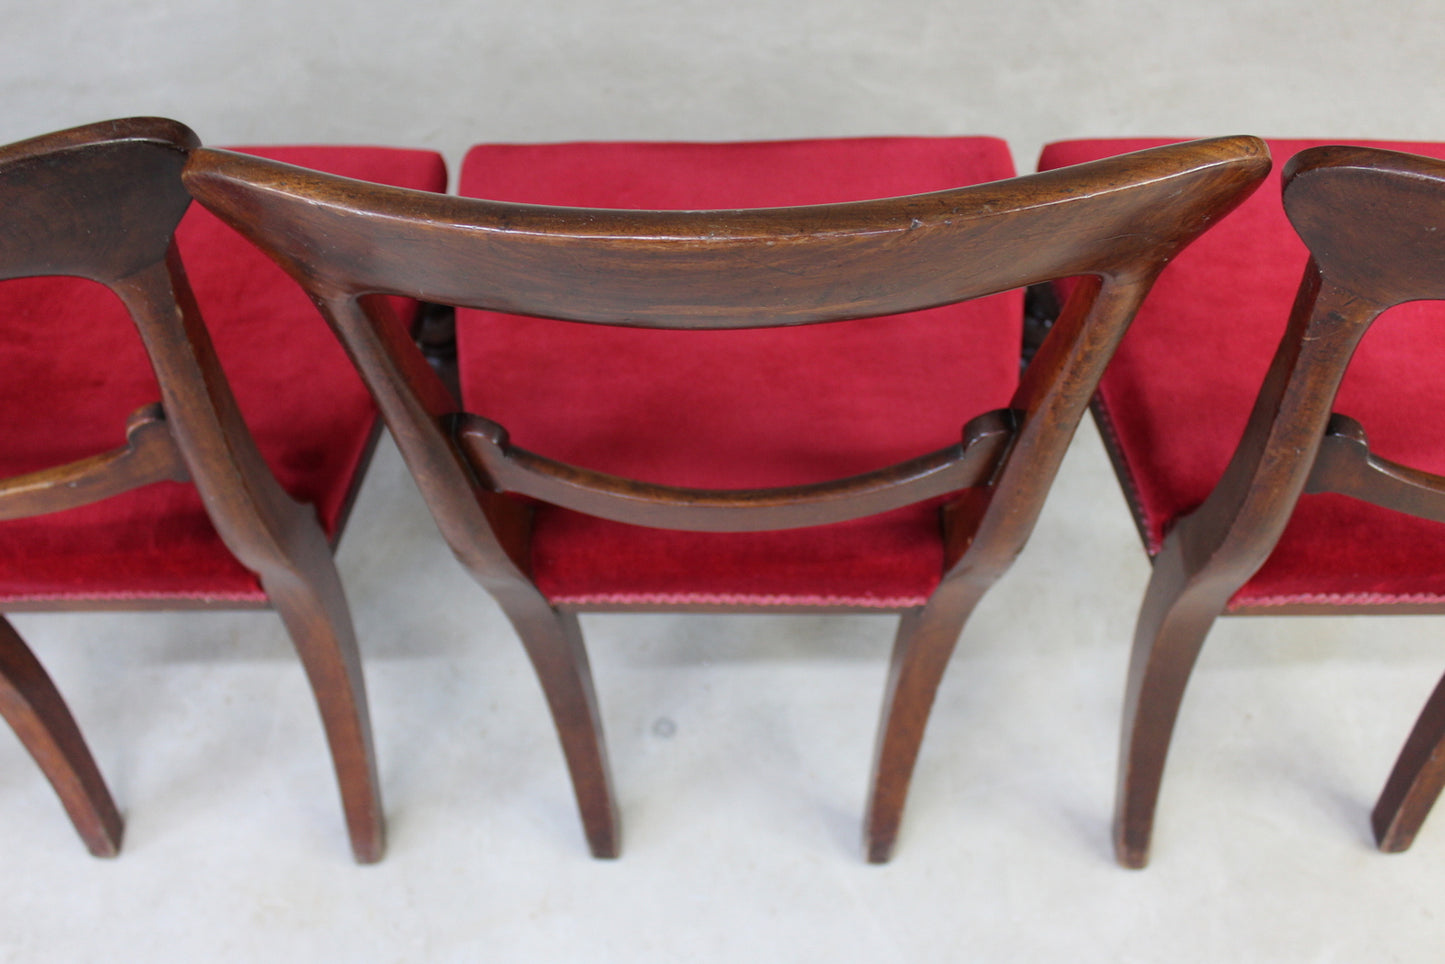 Set 6 Antique Mahogany Dining Chairs - Kernow Furniture